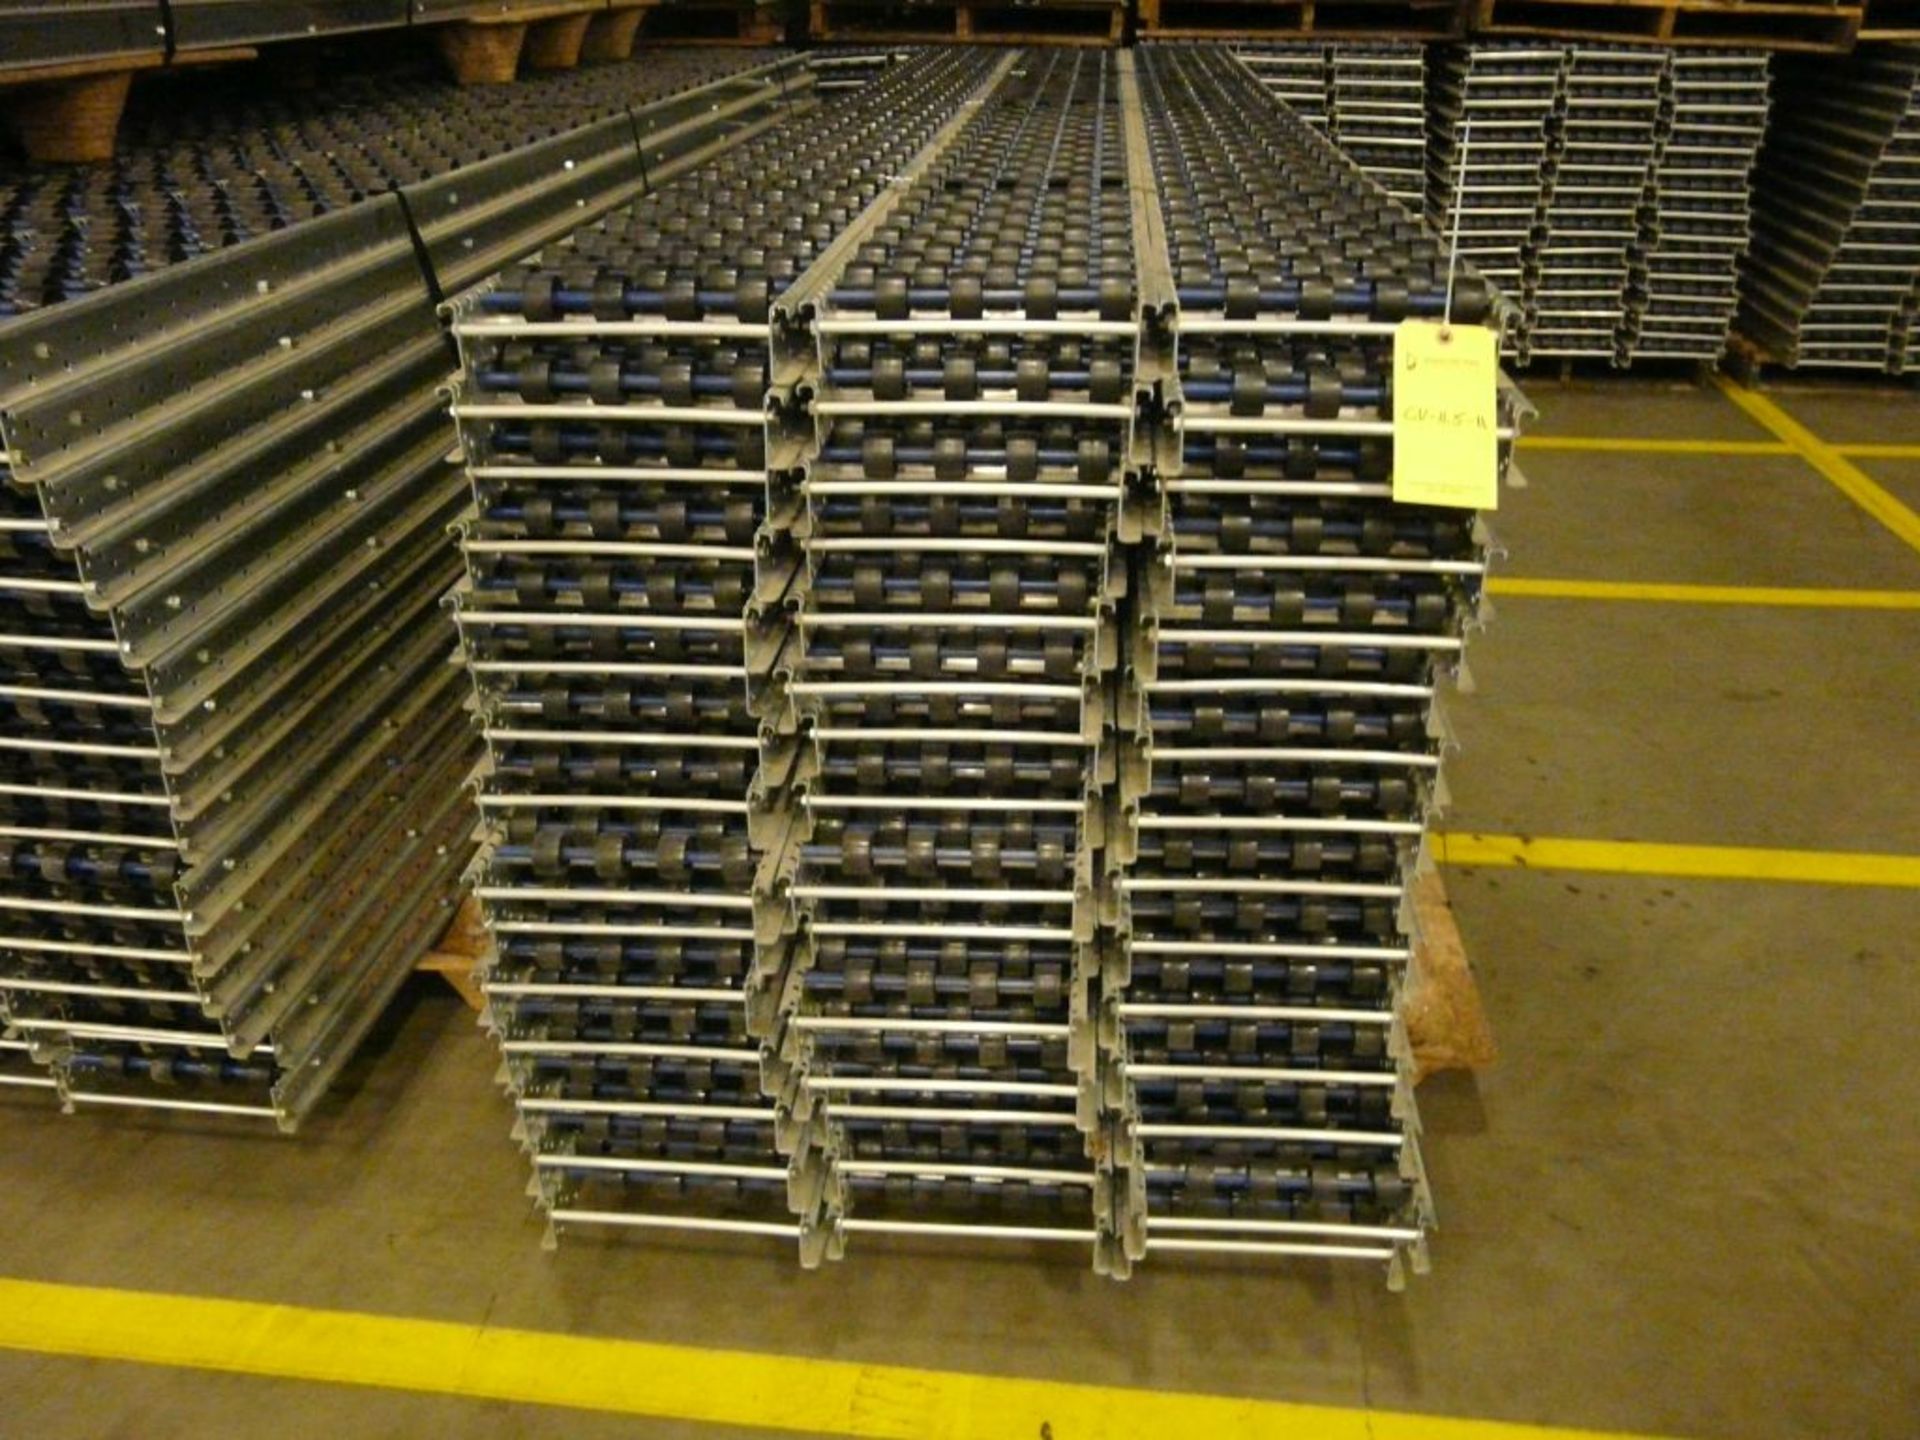 Lot of (90) SpanTrack Wheelbed Carton Flow Conveyors - 11.5'L x 11"W; Tag: 223557 - $30 Lot - Image 2 of 4